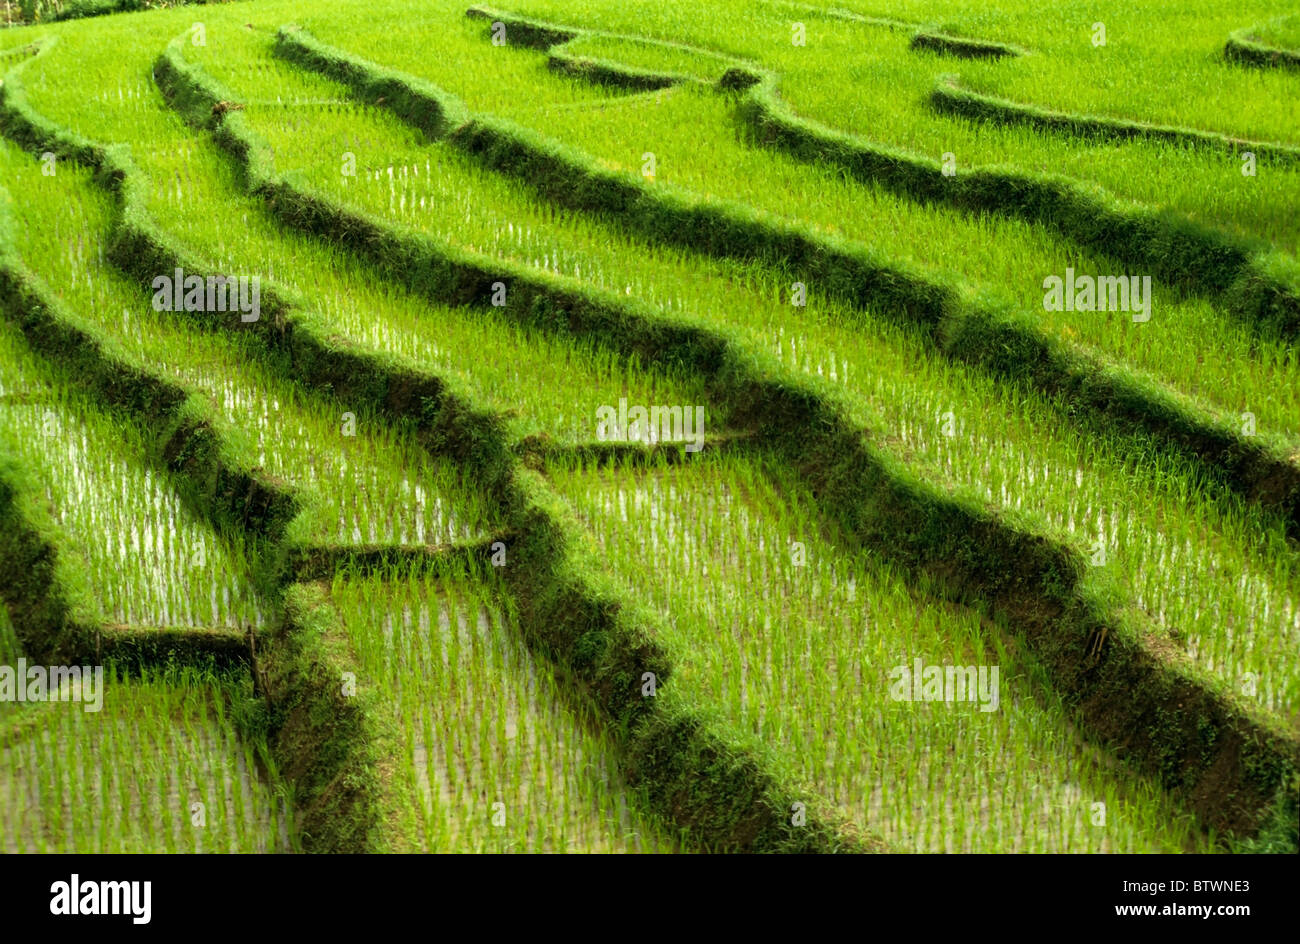 Northern Thailand, terraced rice fields Stock Photo